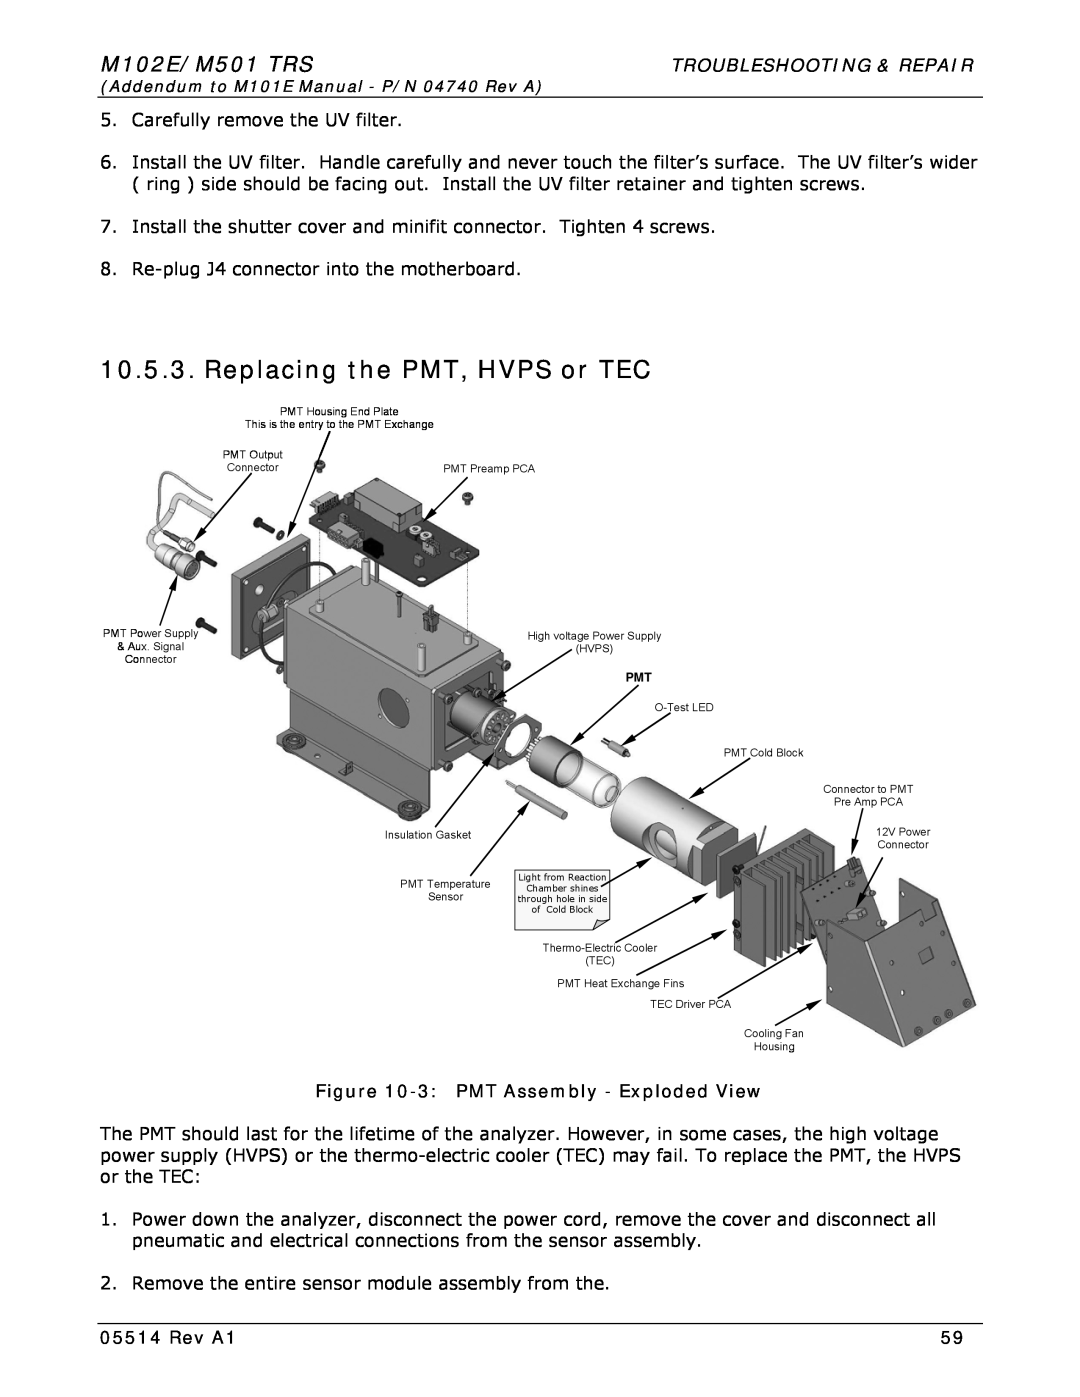 Teledyne manual Replacing the PMT, HVPS or TEC, M102E/M501 TRS, Troubleshooting & Repair, 3 PMT Assembly - Exploded View 